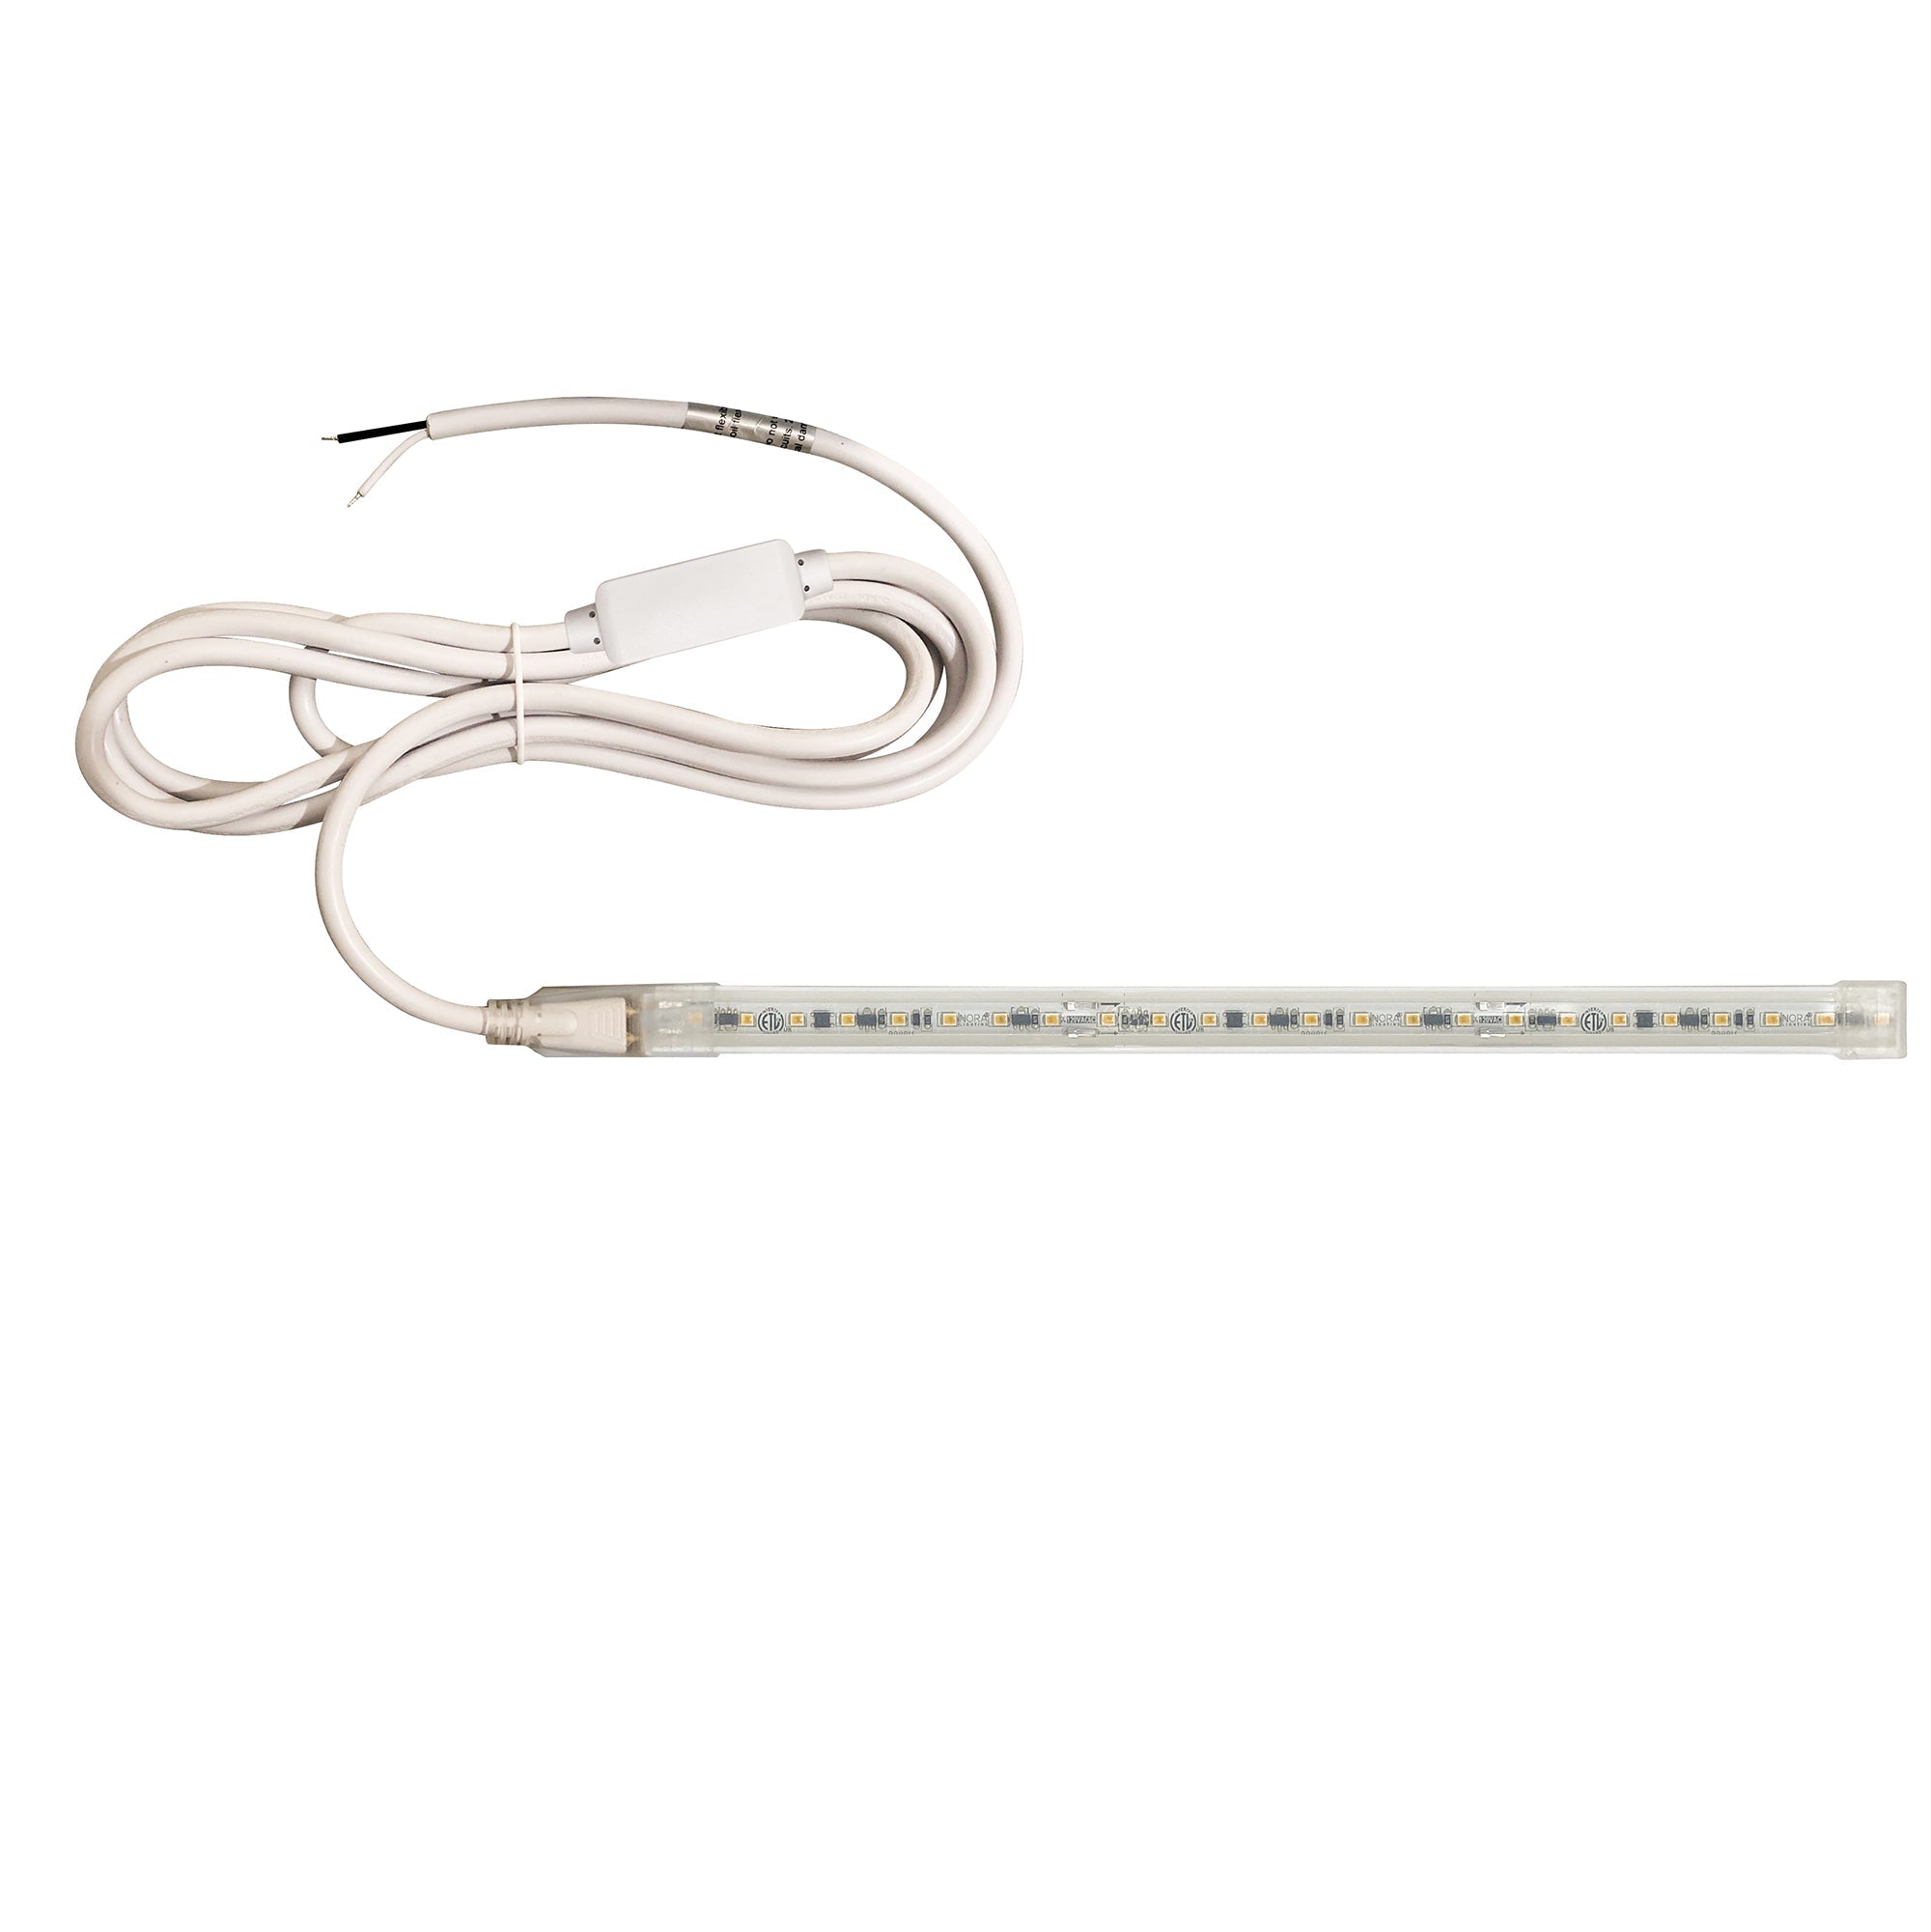 Nora Lighting NUTP13-W78-12-930/HWSP - Accent / Undercabinet - Custom Cut 78-ft 120V Continuous LED Tape Light, 330lm / 3.6W per foot, 3000K, w/ Mounting Clips and 8' Hardwired Power Cord w/ Surge Protector